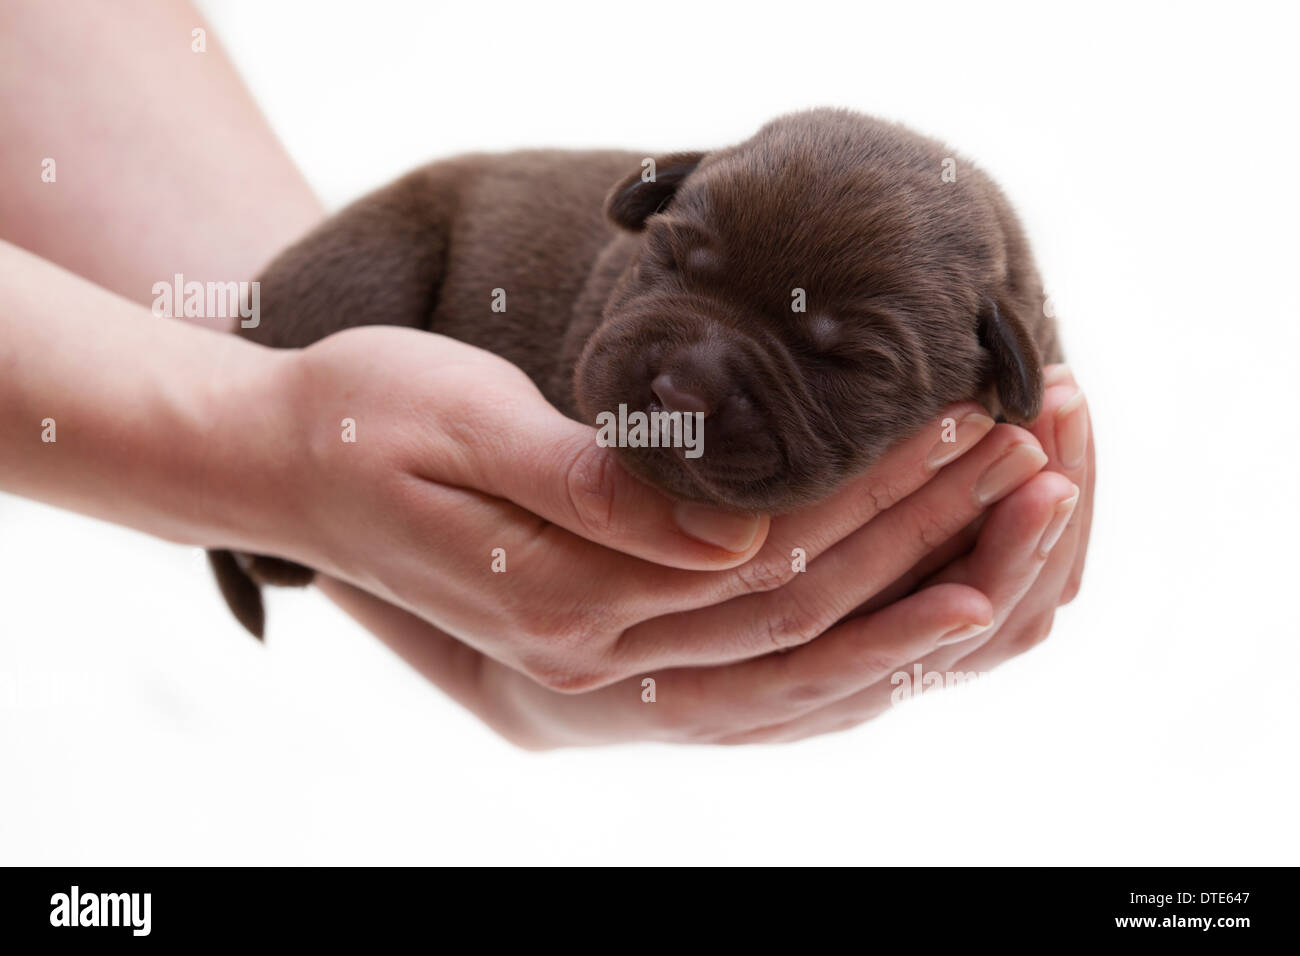 Labrador Retriever puppy lying on woman's hand. Studio picture against a white background. Stock Photo